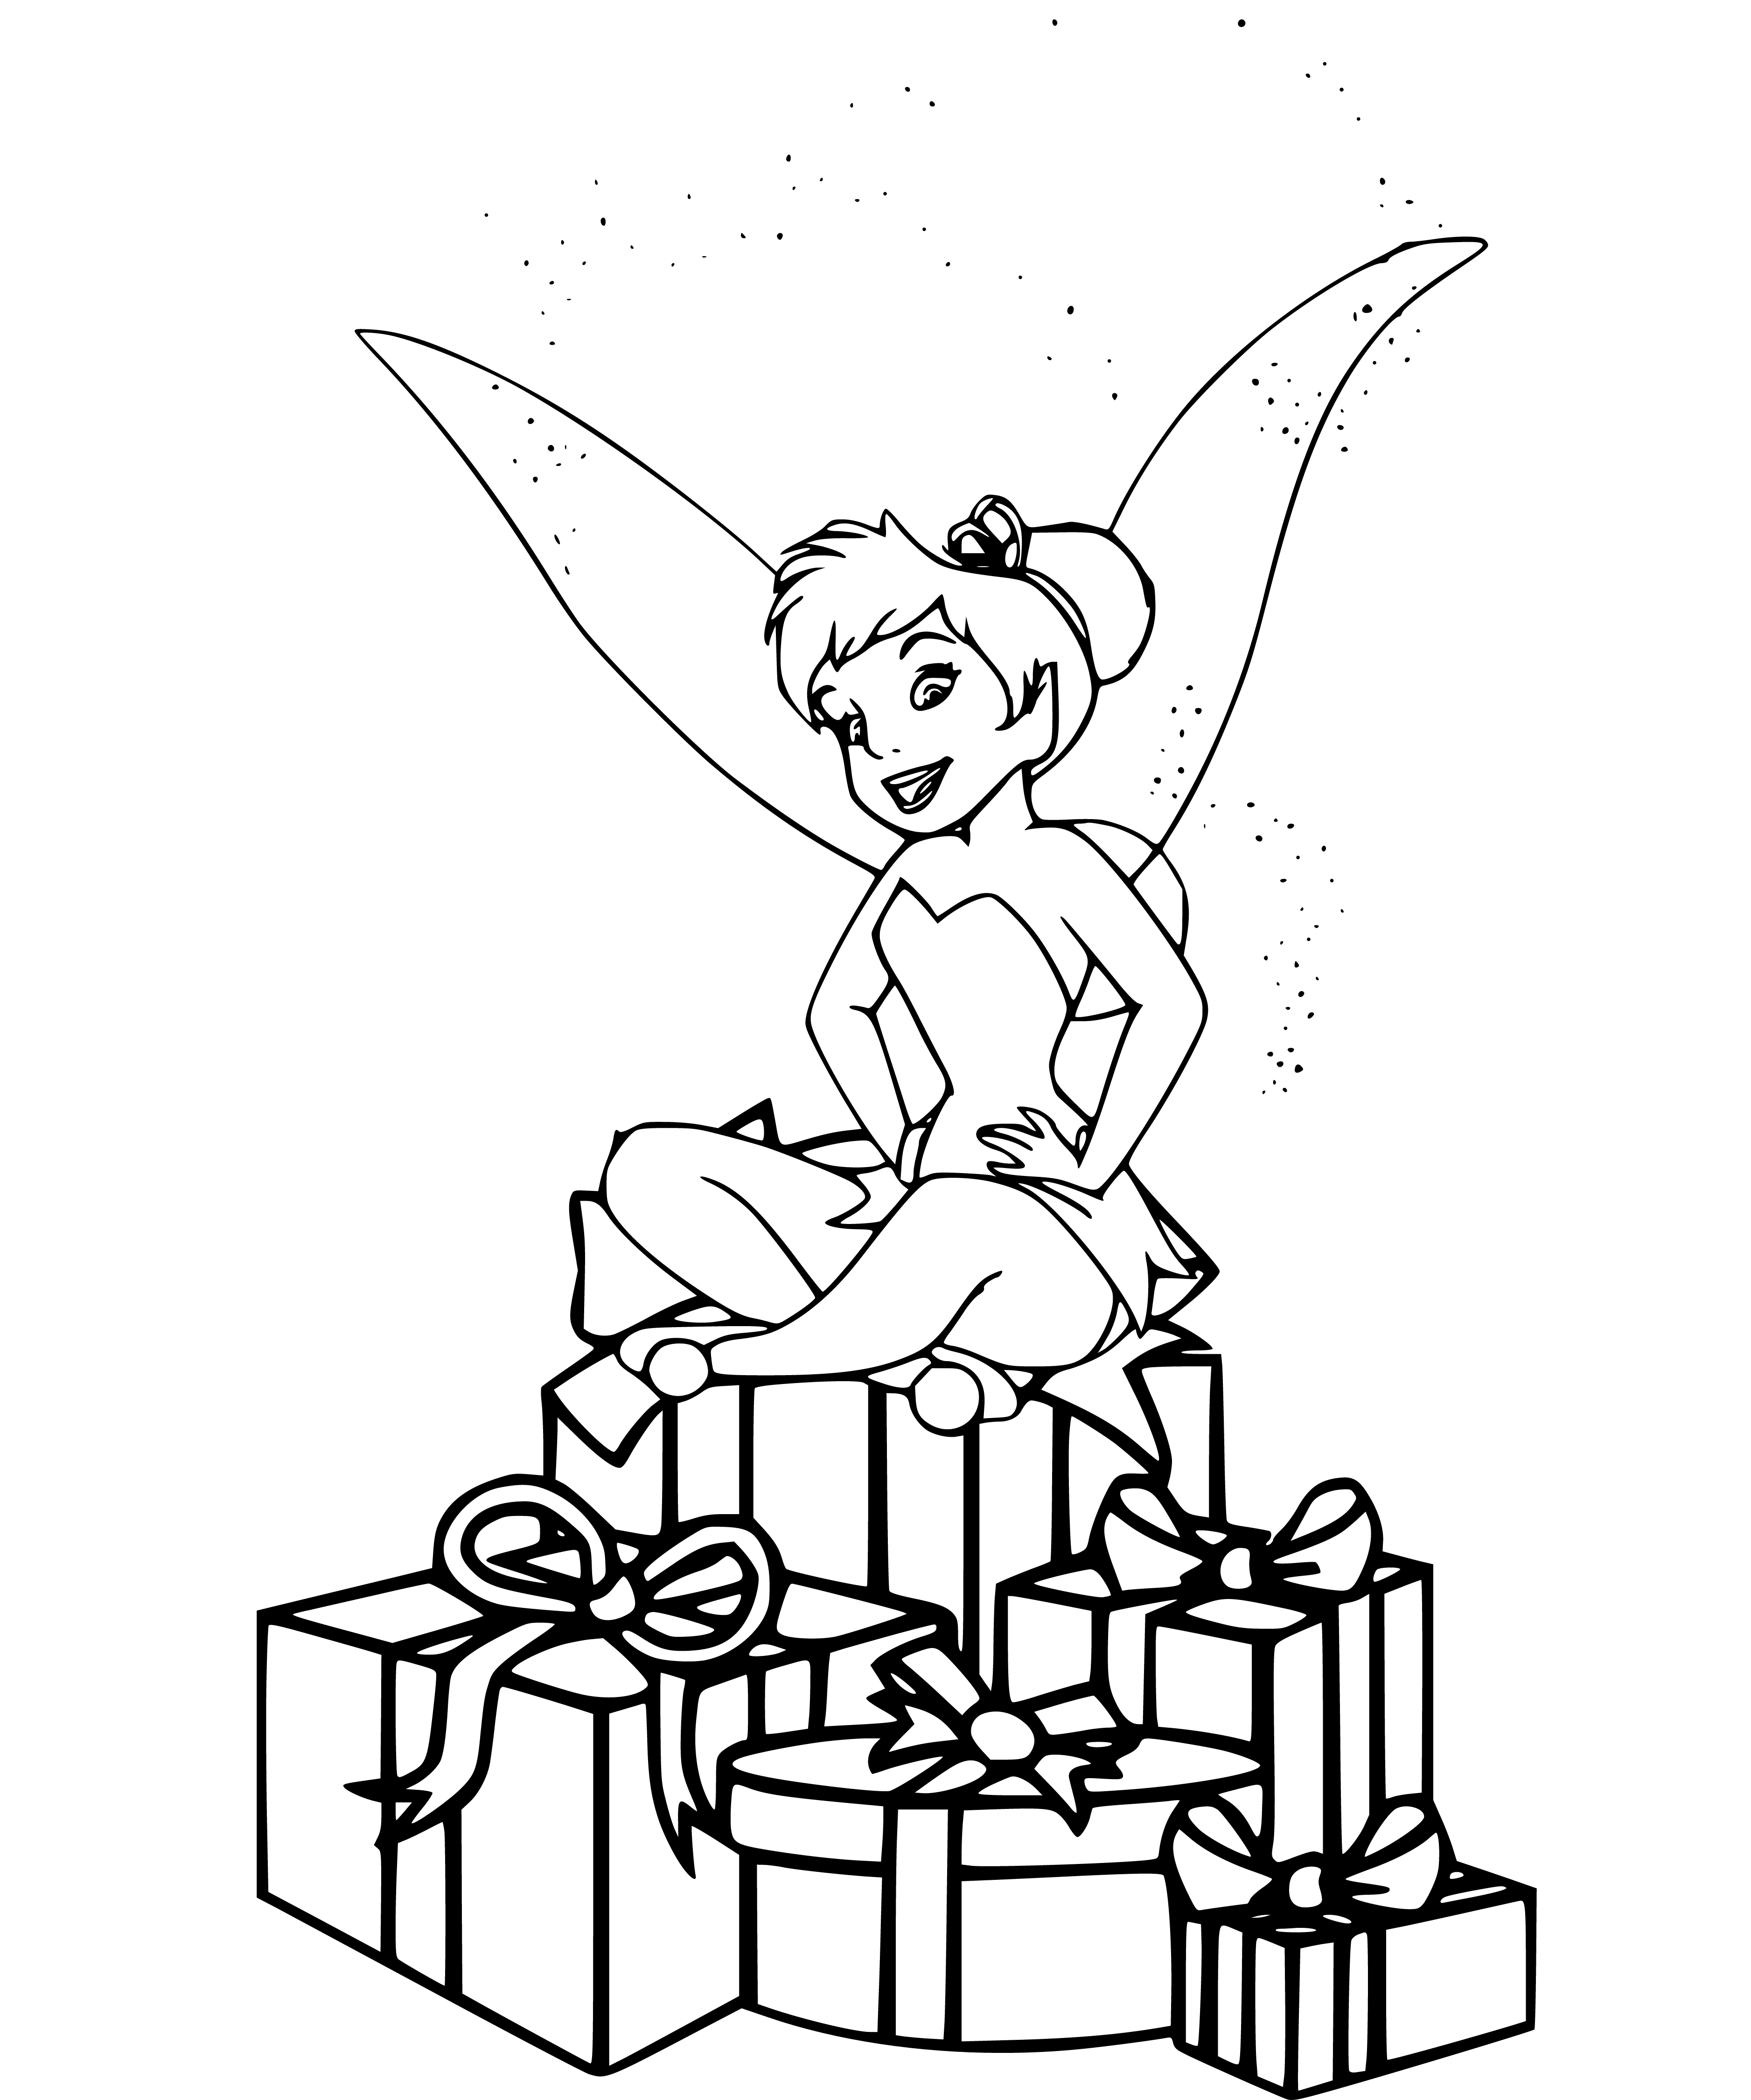 Tinker Bell Gifts Coloring Pages for kids printable - SheetalColor.com